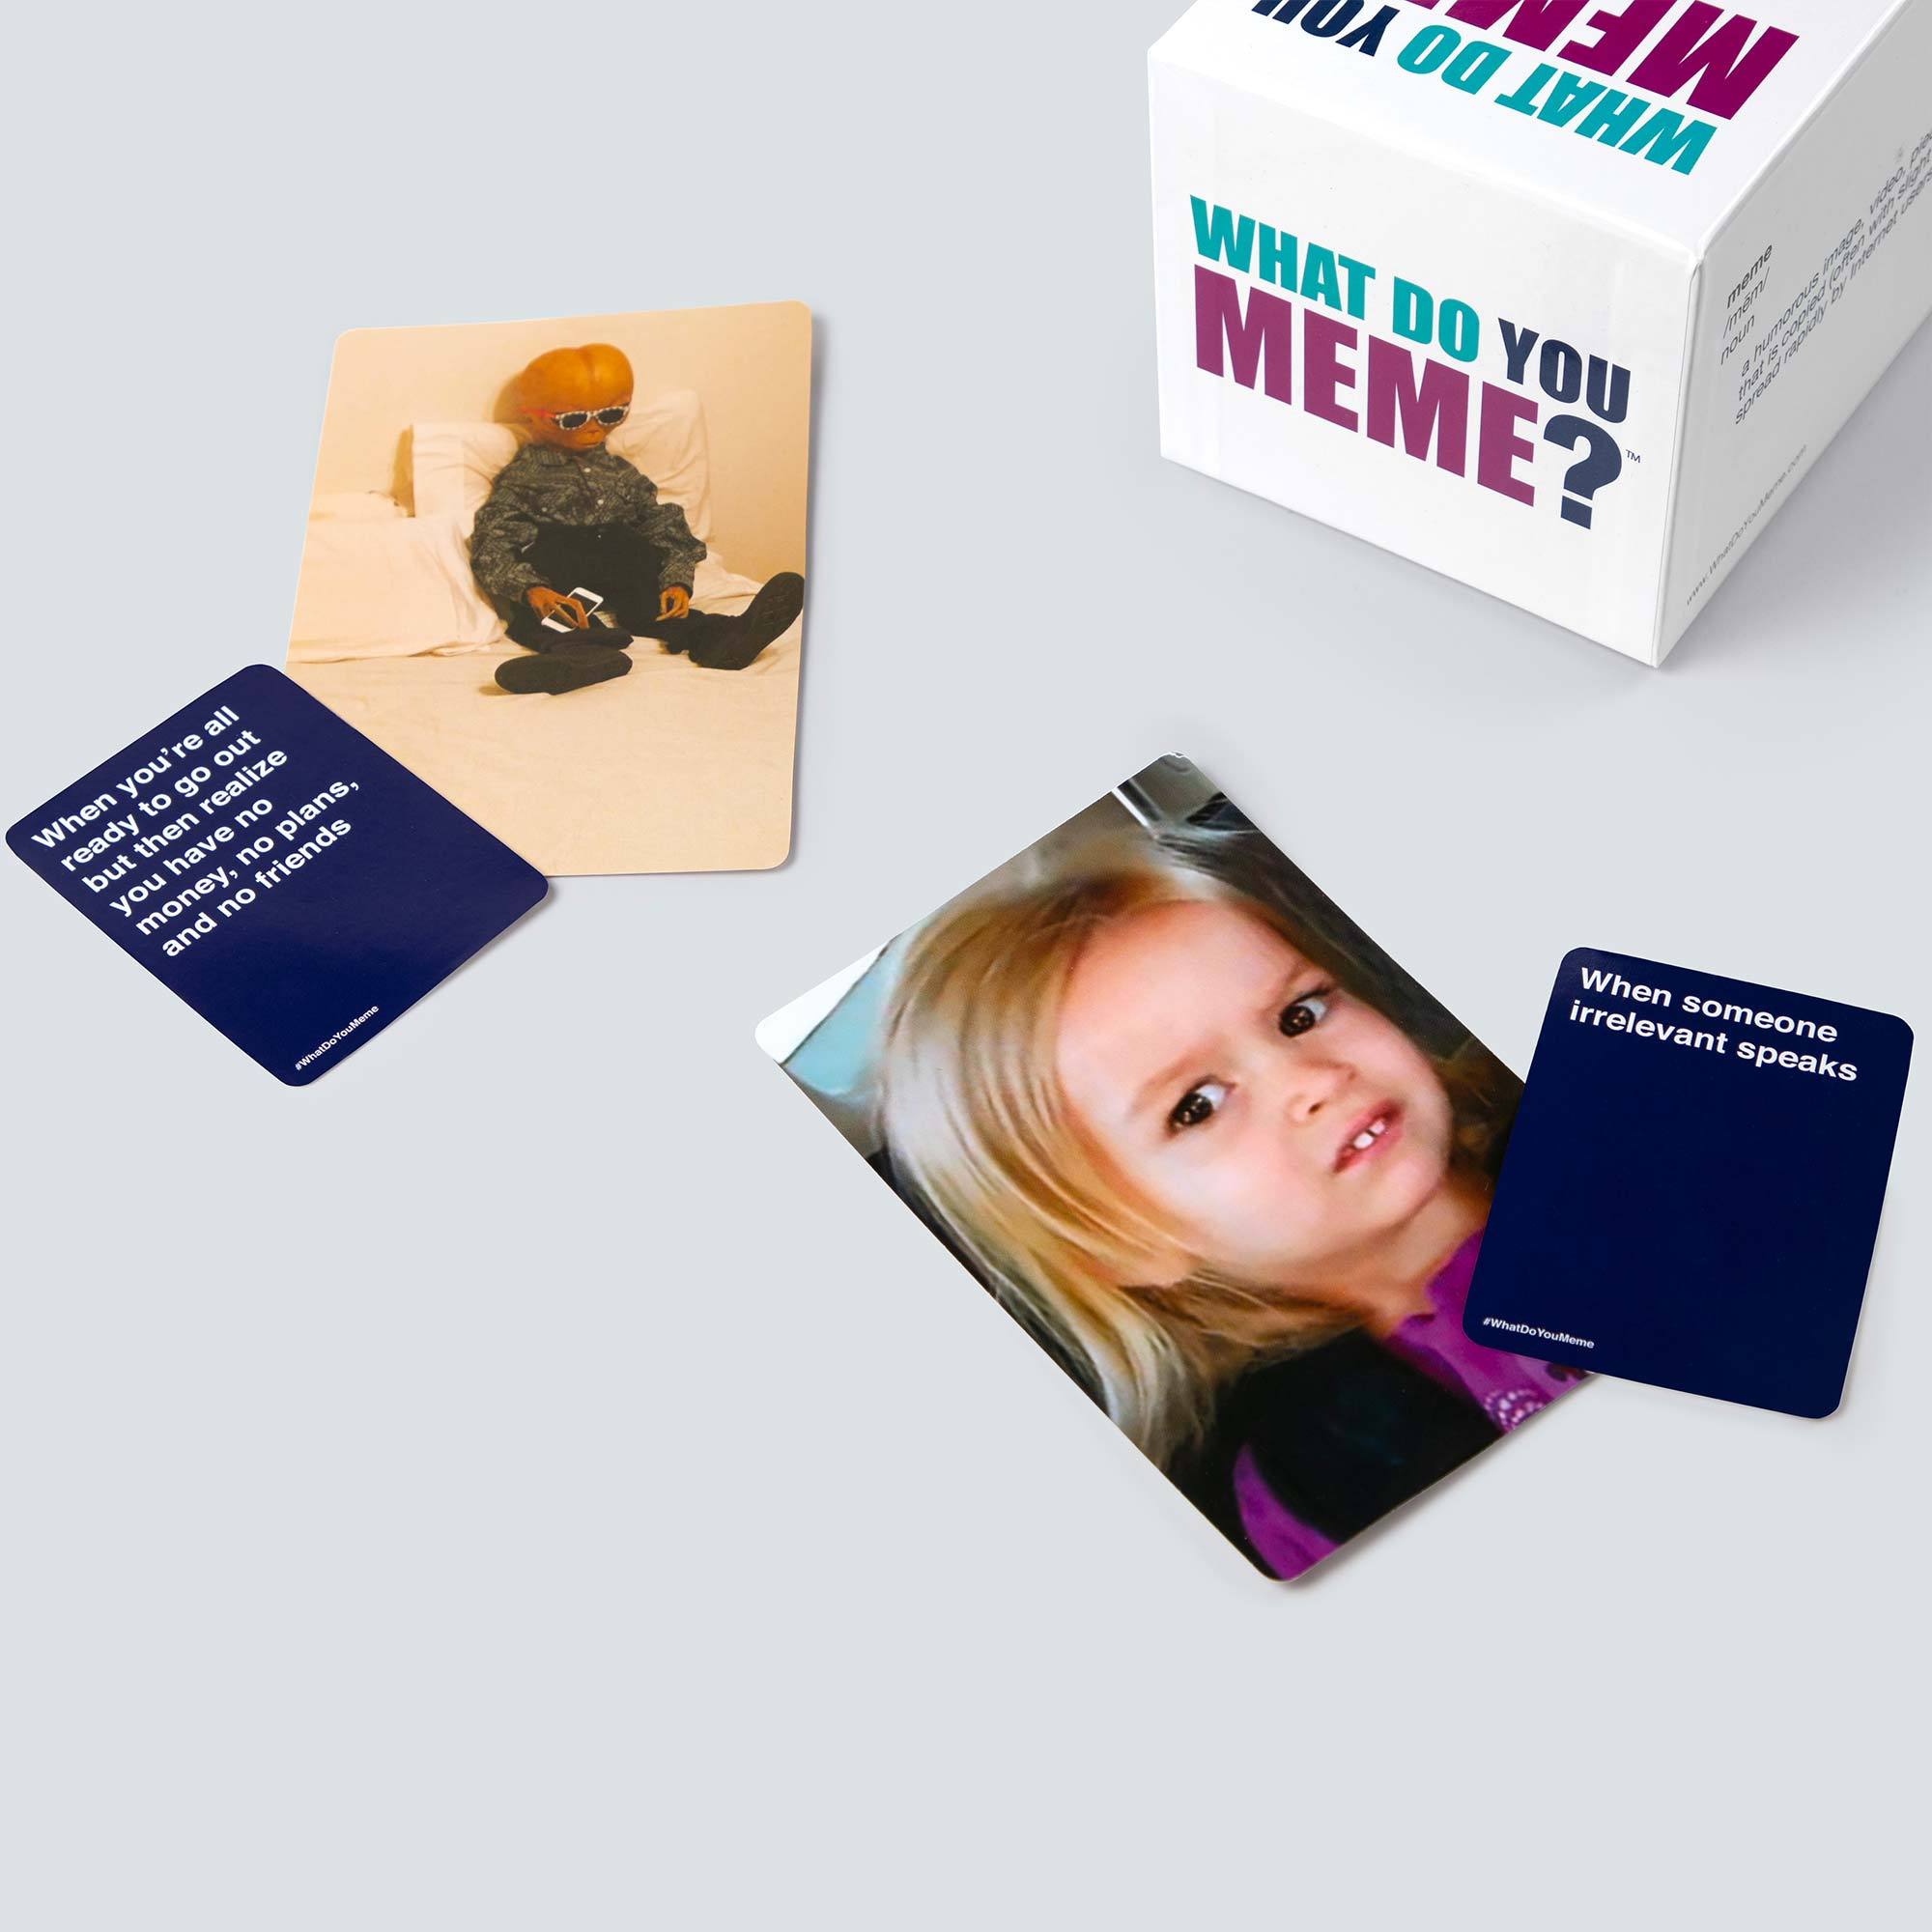 Meme Match by What Do You Meme? Party Game 